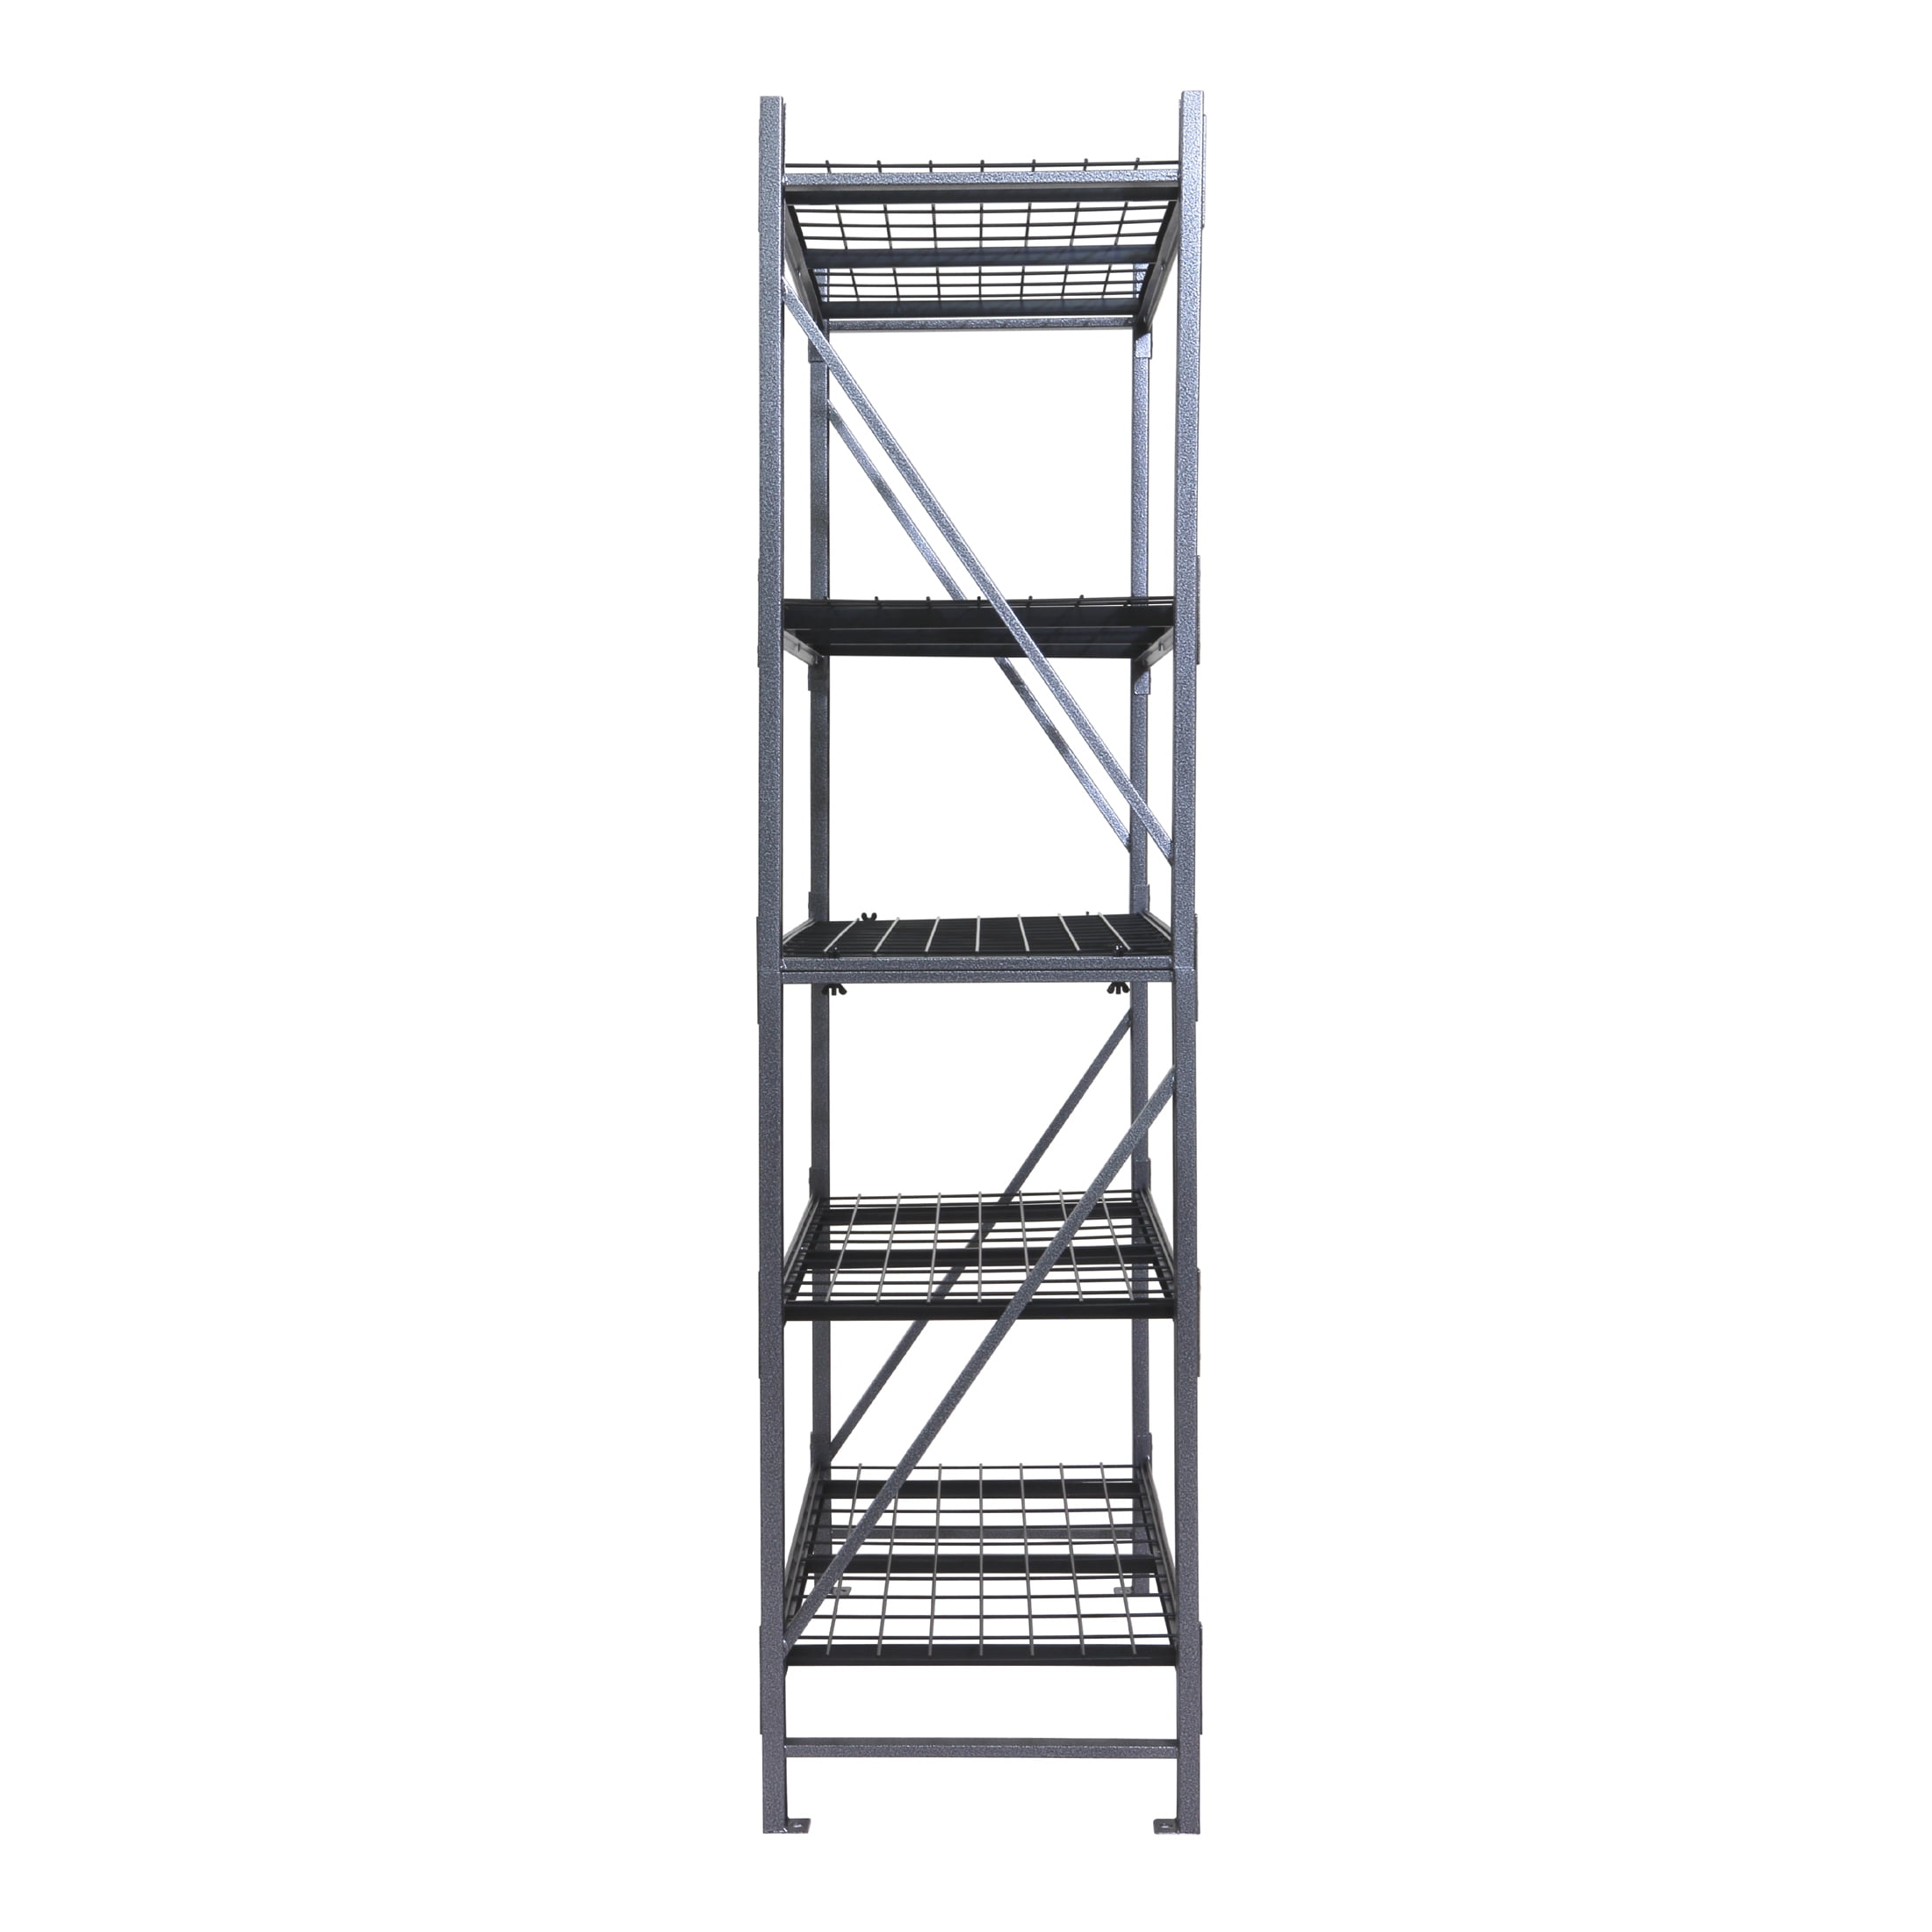 STRONGHOLD GARAGE GEAR Steel 4-Tier Storage Shelf Unit 72H x 24W x 77D,  4000lb Total Capacity, Textured gray